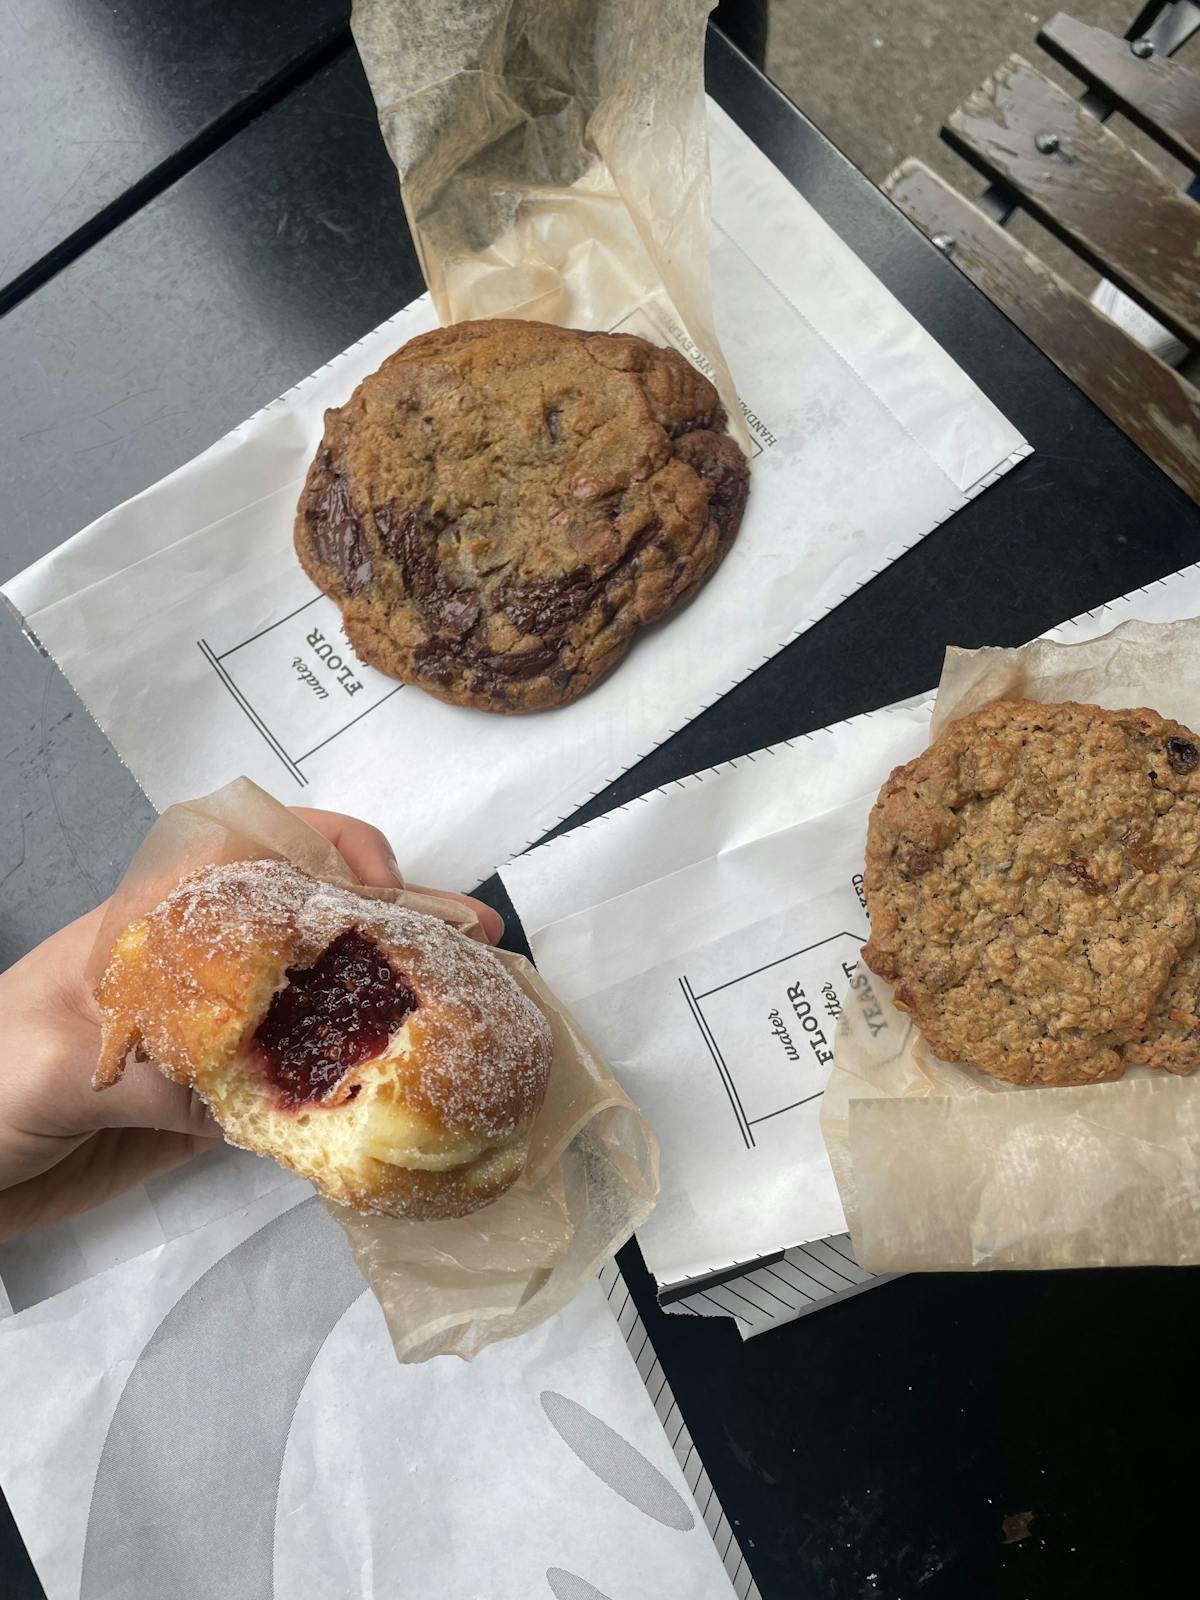 A jelly donut, a chocolate chip cookie, and an oatmeal cookie from Orwasher's Bakery in the Upper West Side.